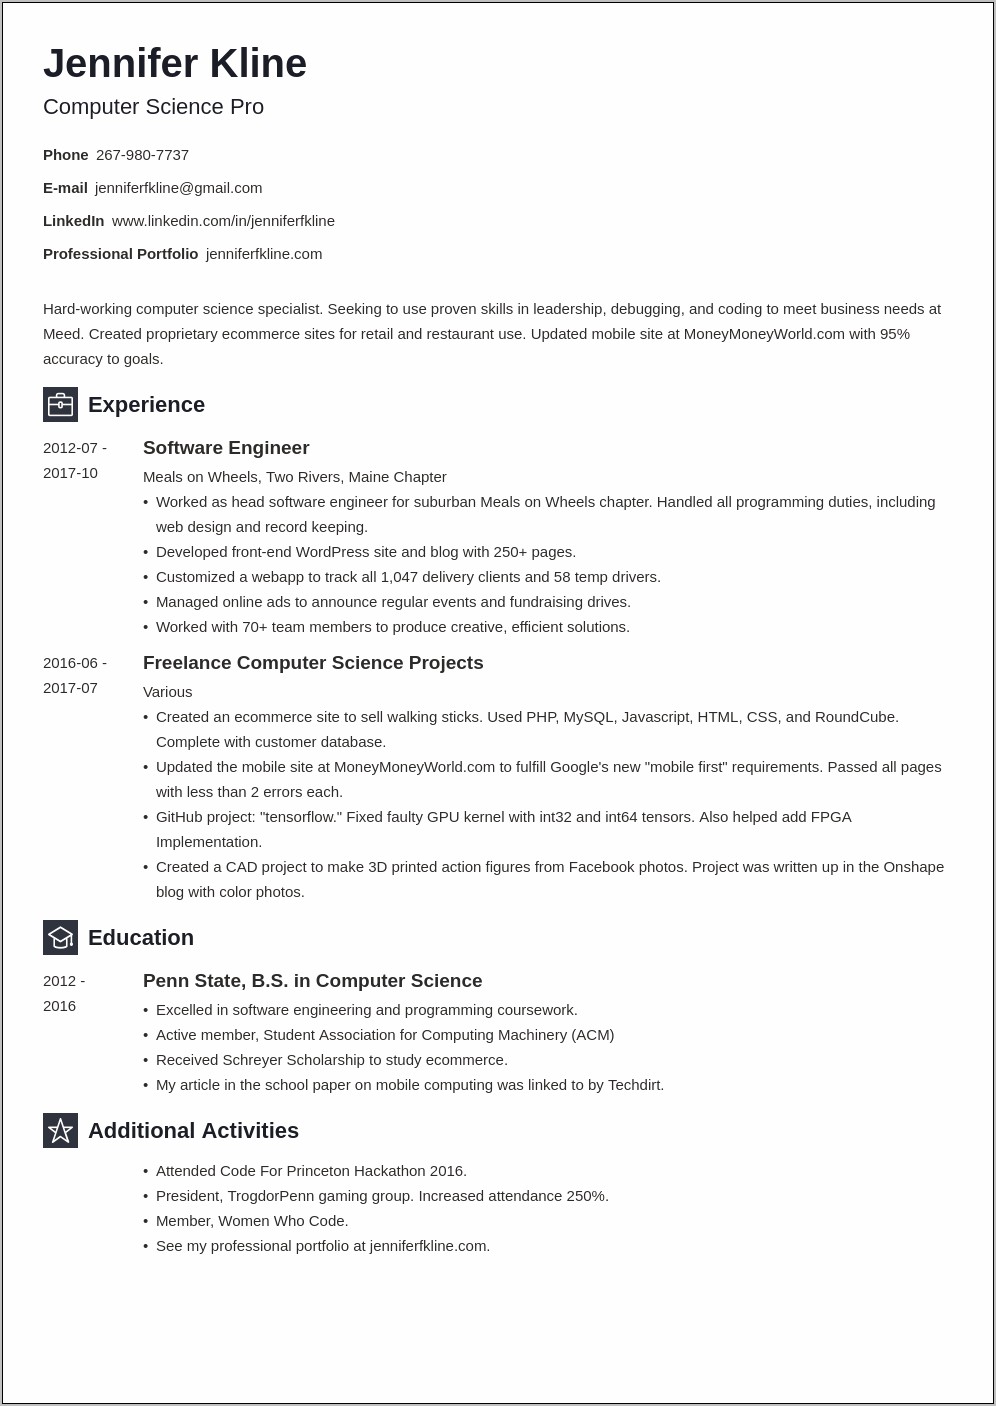 Chronological Resume Format With Volunteer Experience